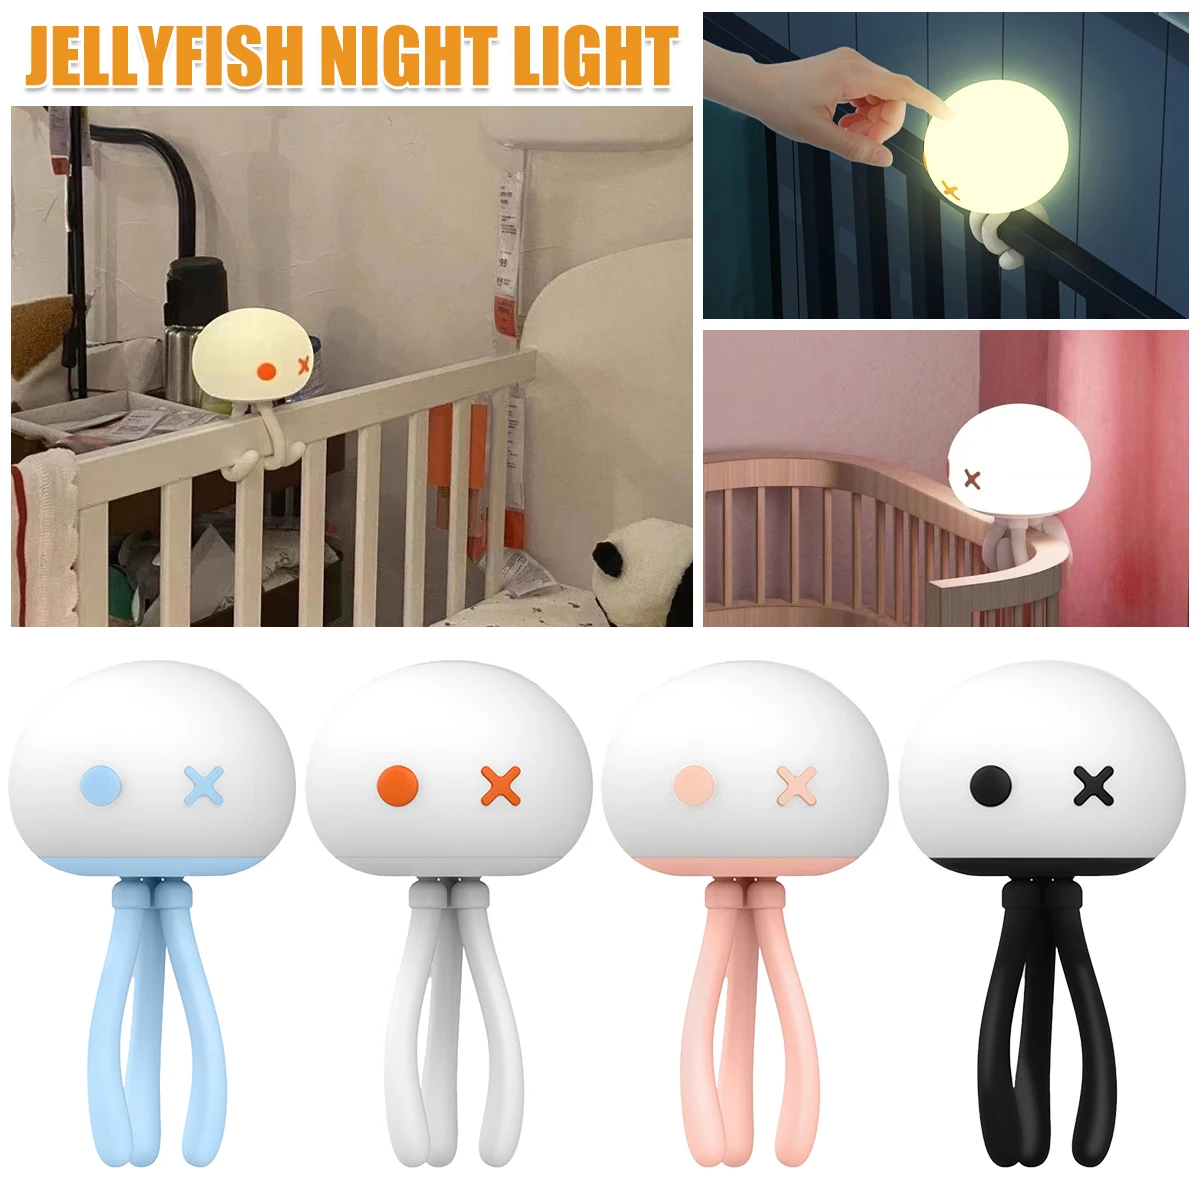 

New Jellyfish Baby Night Light with Flexible Tripod 3 Color Changing LED Table Light 1.5W DC5V 1200mAh USB Rechargeable Silicone